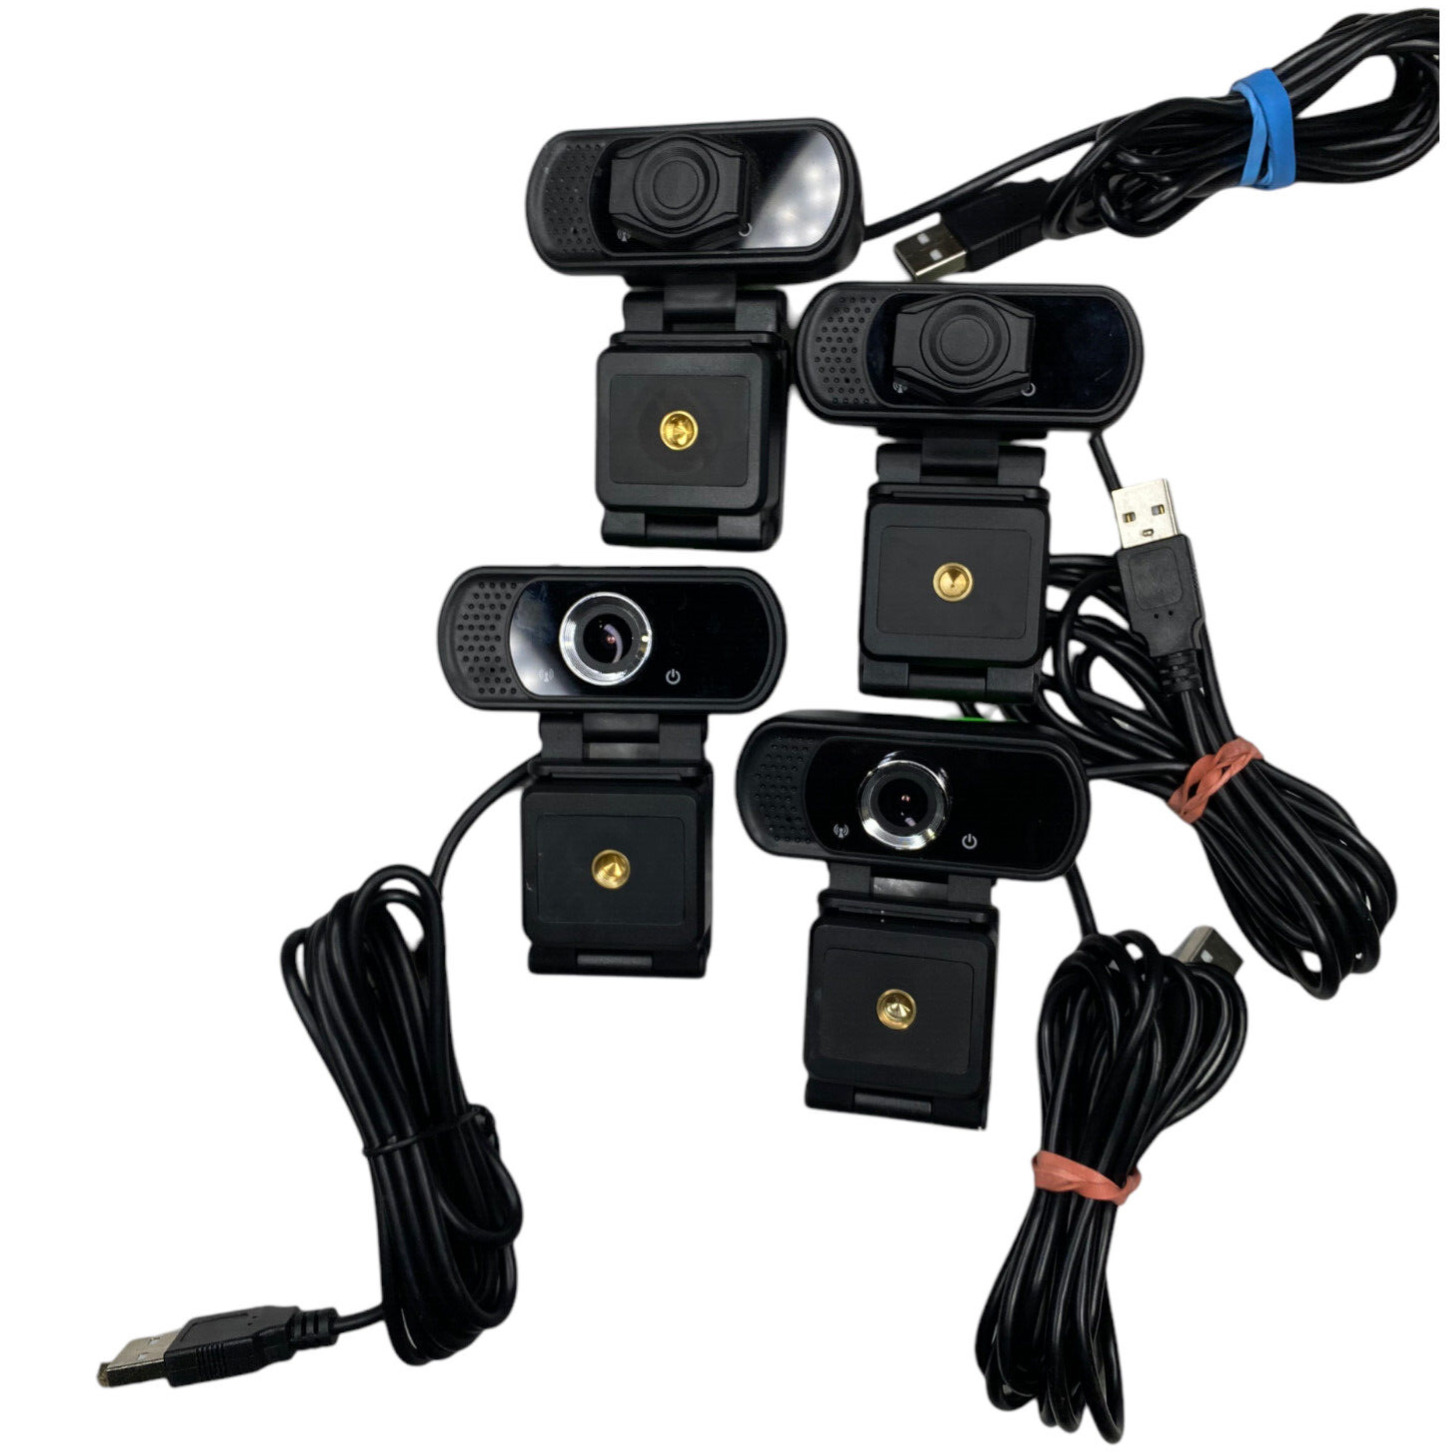 Lot of 4 Webcam N5 HD 1080p Black Web Camera USB Computer with Microphone